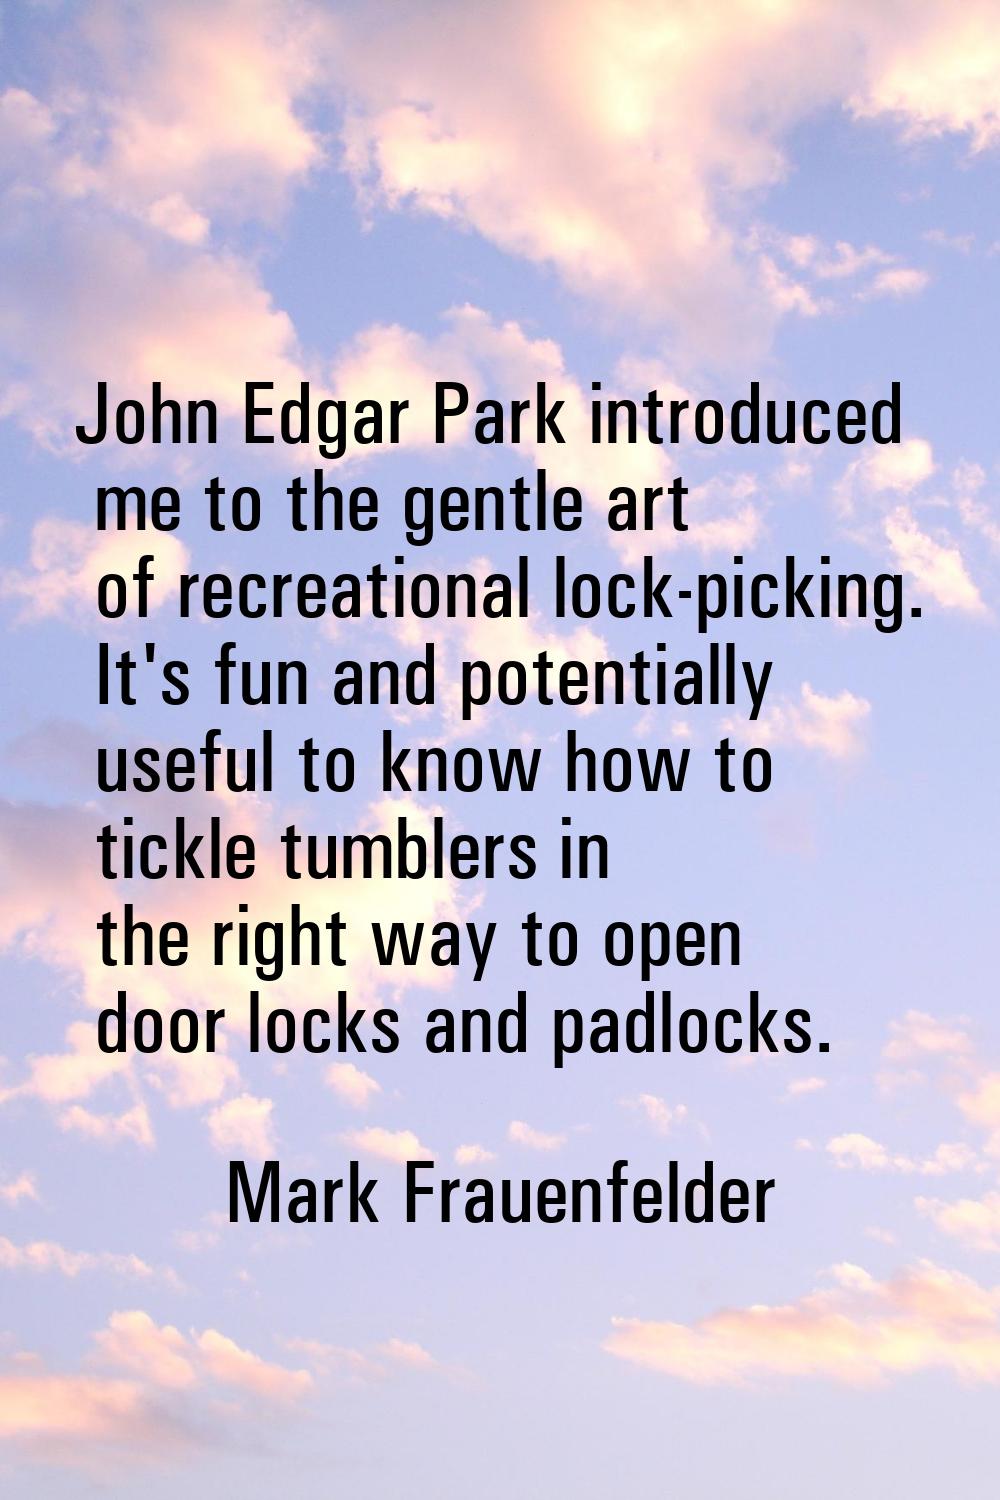 John Edgar Park introduced me to the gentle art of recreational lock-picking. It's fun and potentia